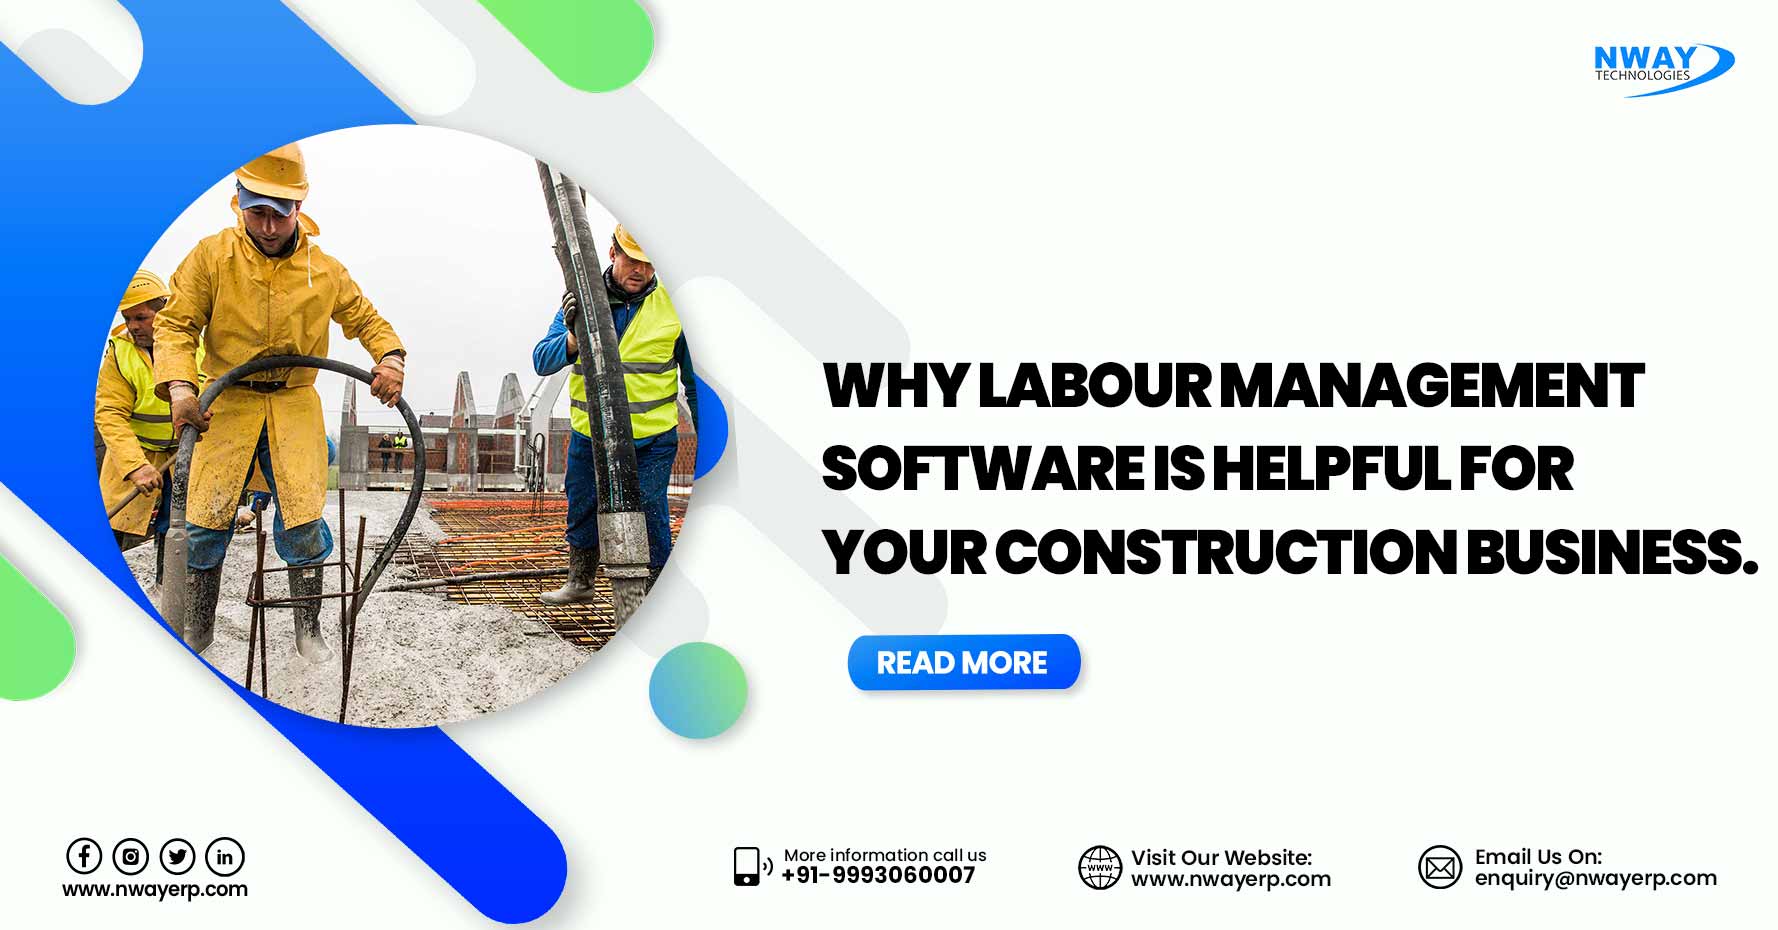 Why Labour Management Software is helpful for your Construction Business